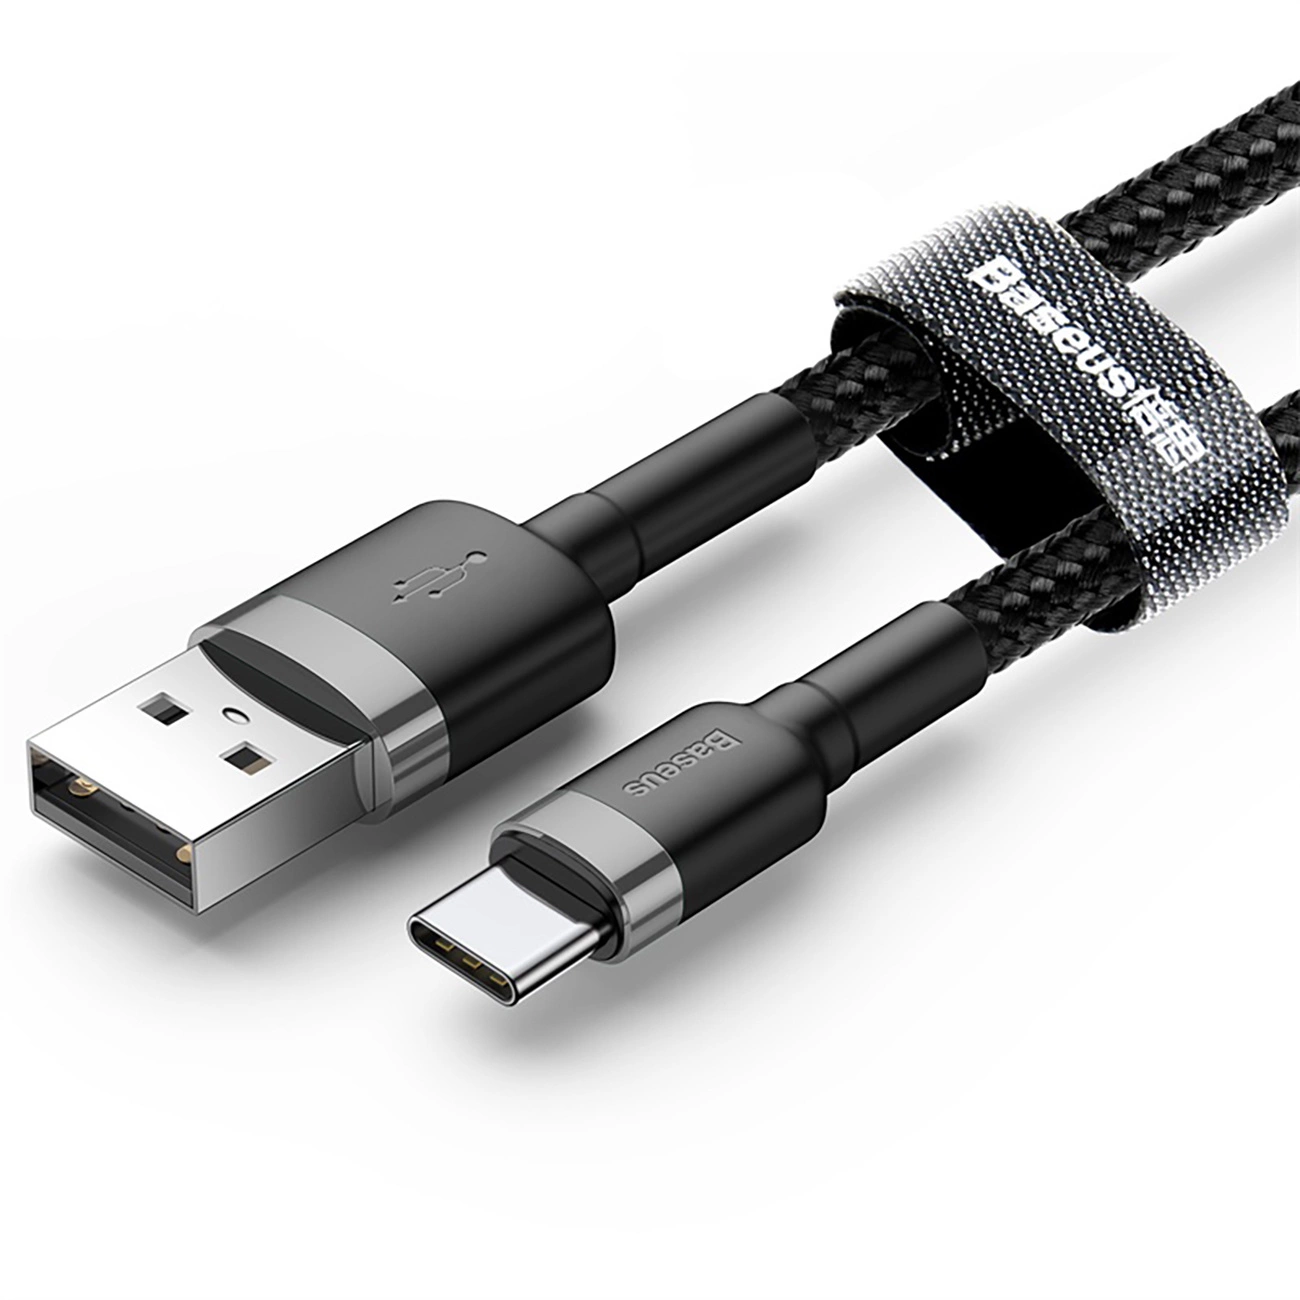 Baseus Cafule USB-A / USB-C QC 3.0 3A cable 1 m - black and gray on white background